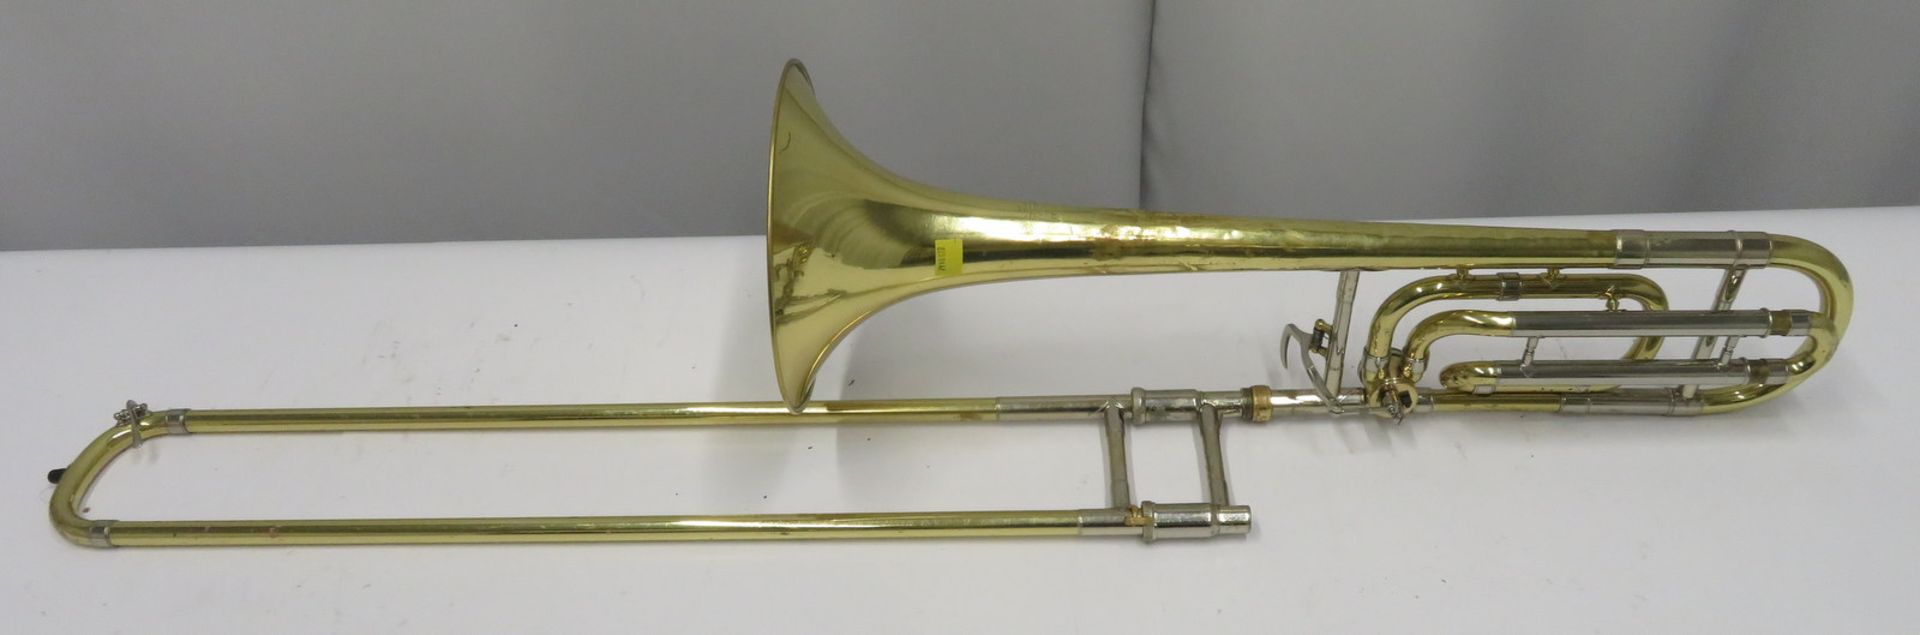 Bach Stradivarius model 42 trombone with case. Serial number: 89433. - Image 2 of 14